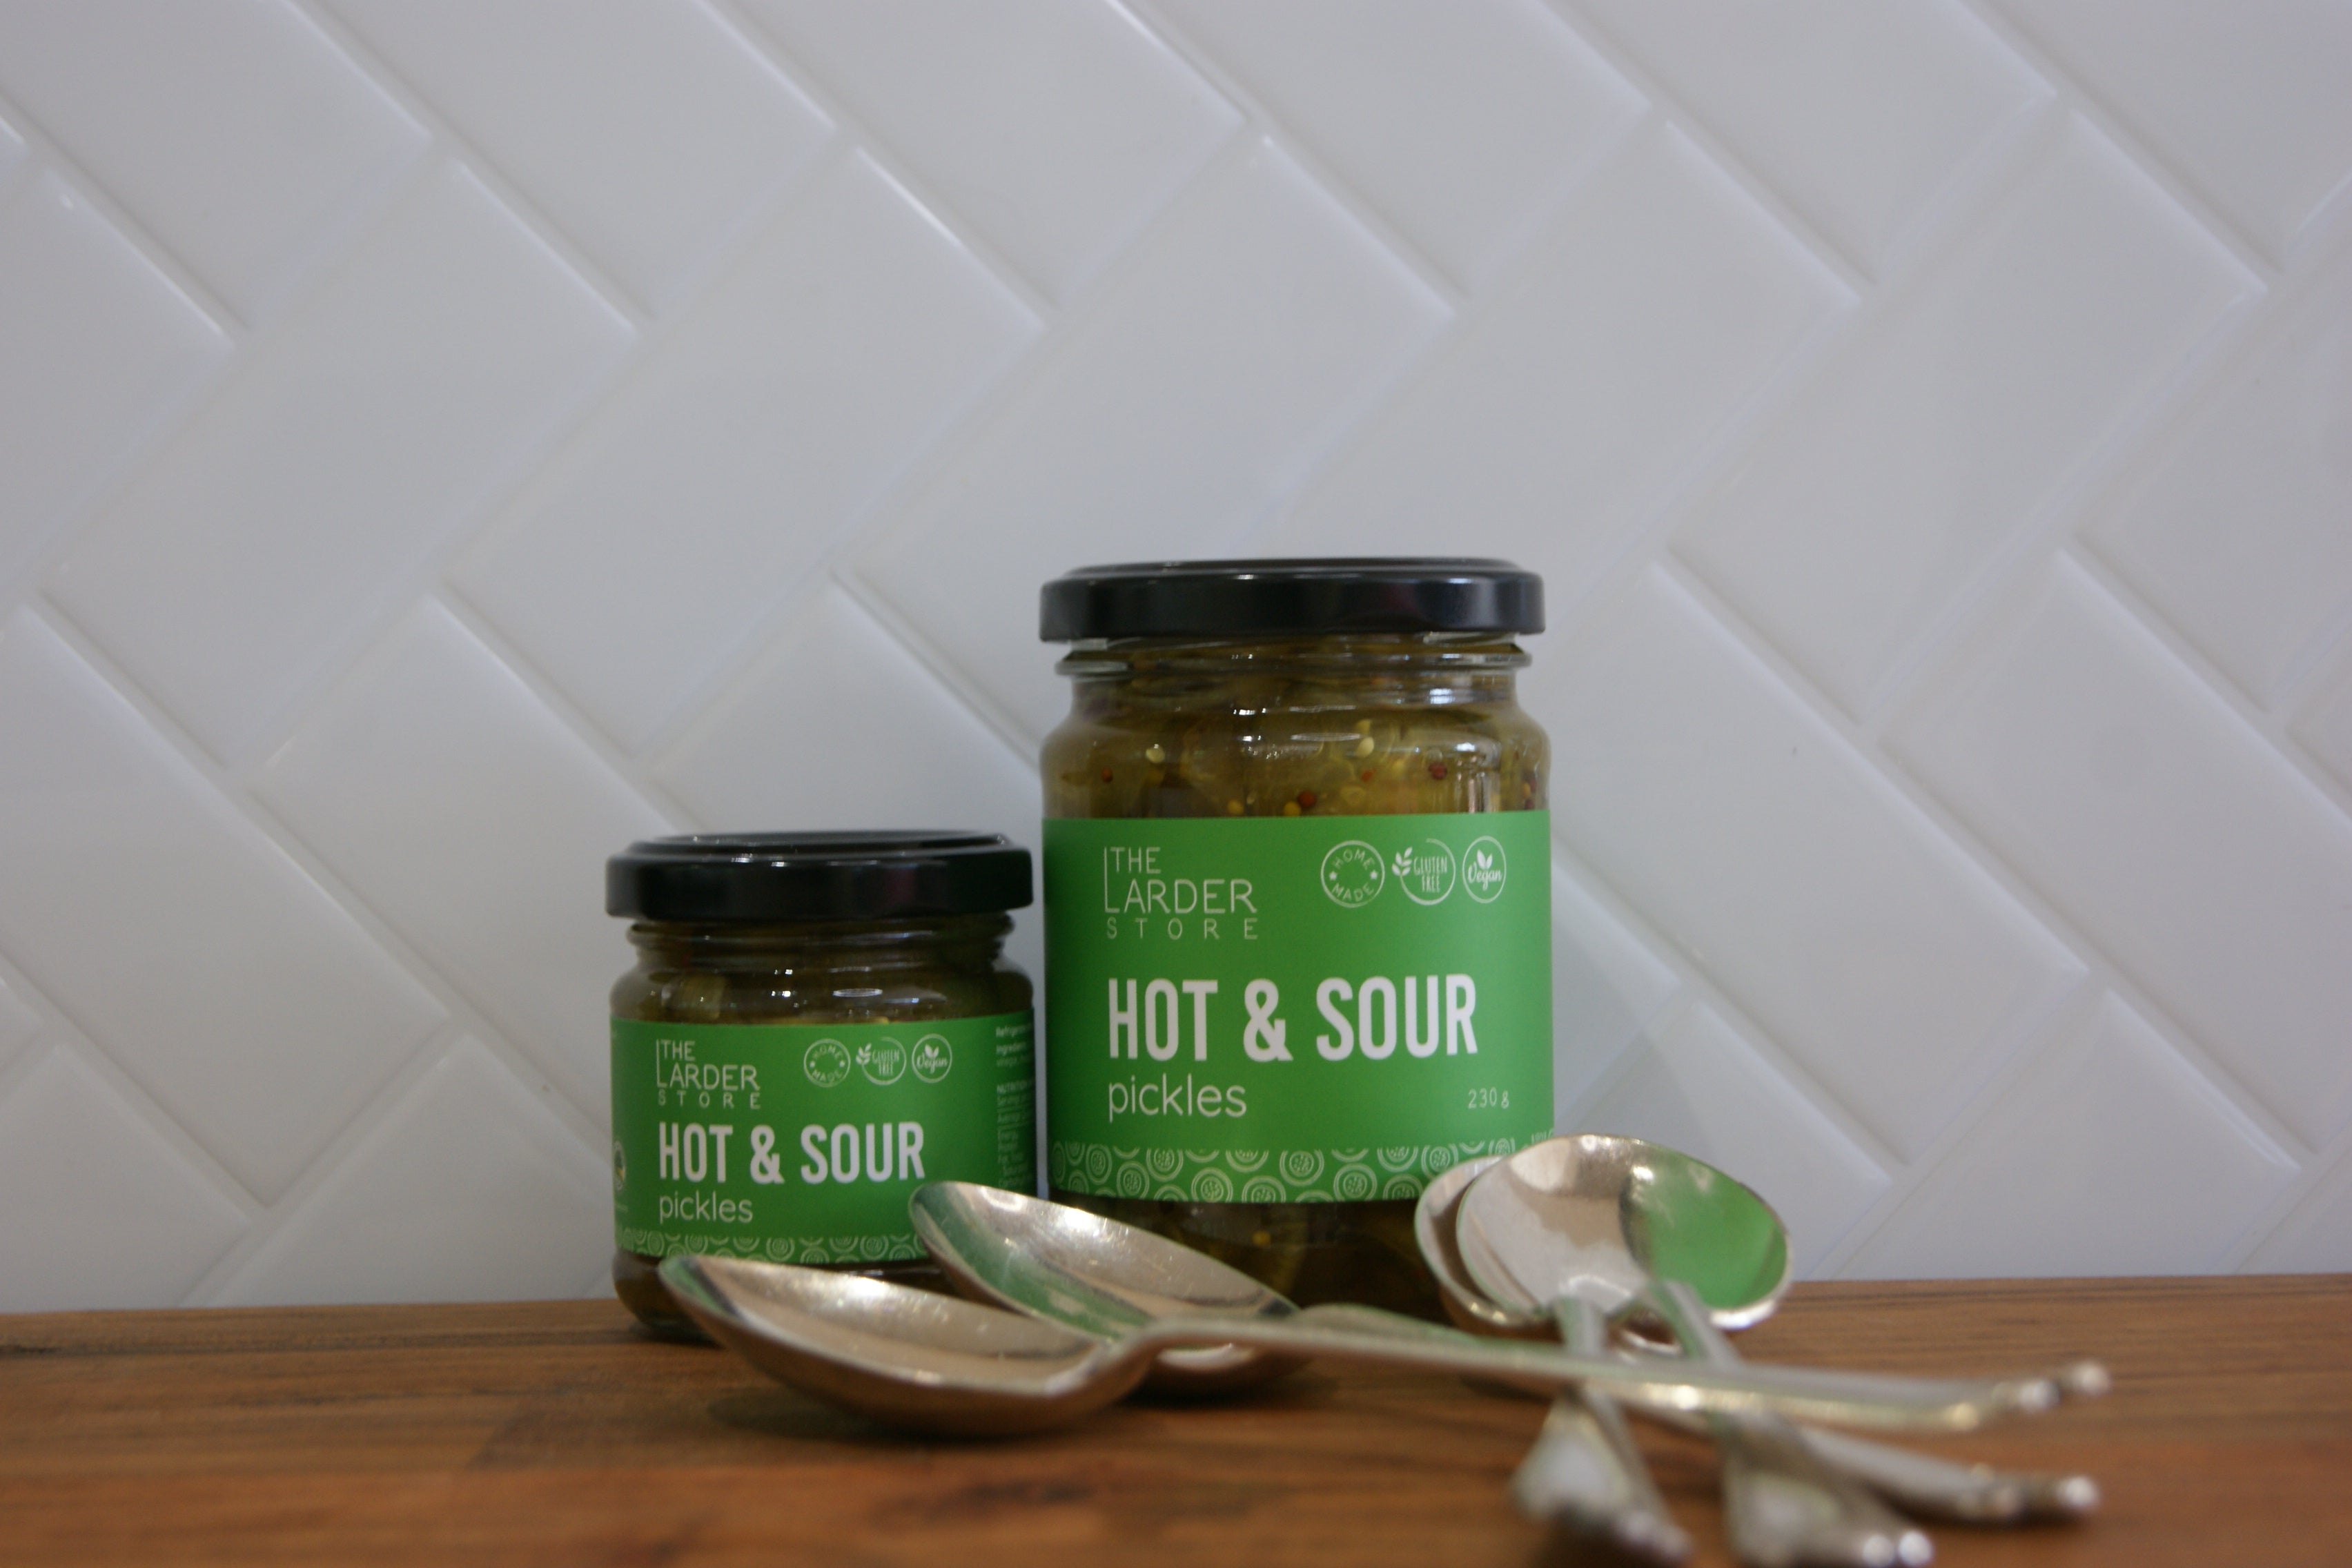 Hot and Sour Pickles  "HIGHLY COMMENDED"